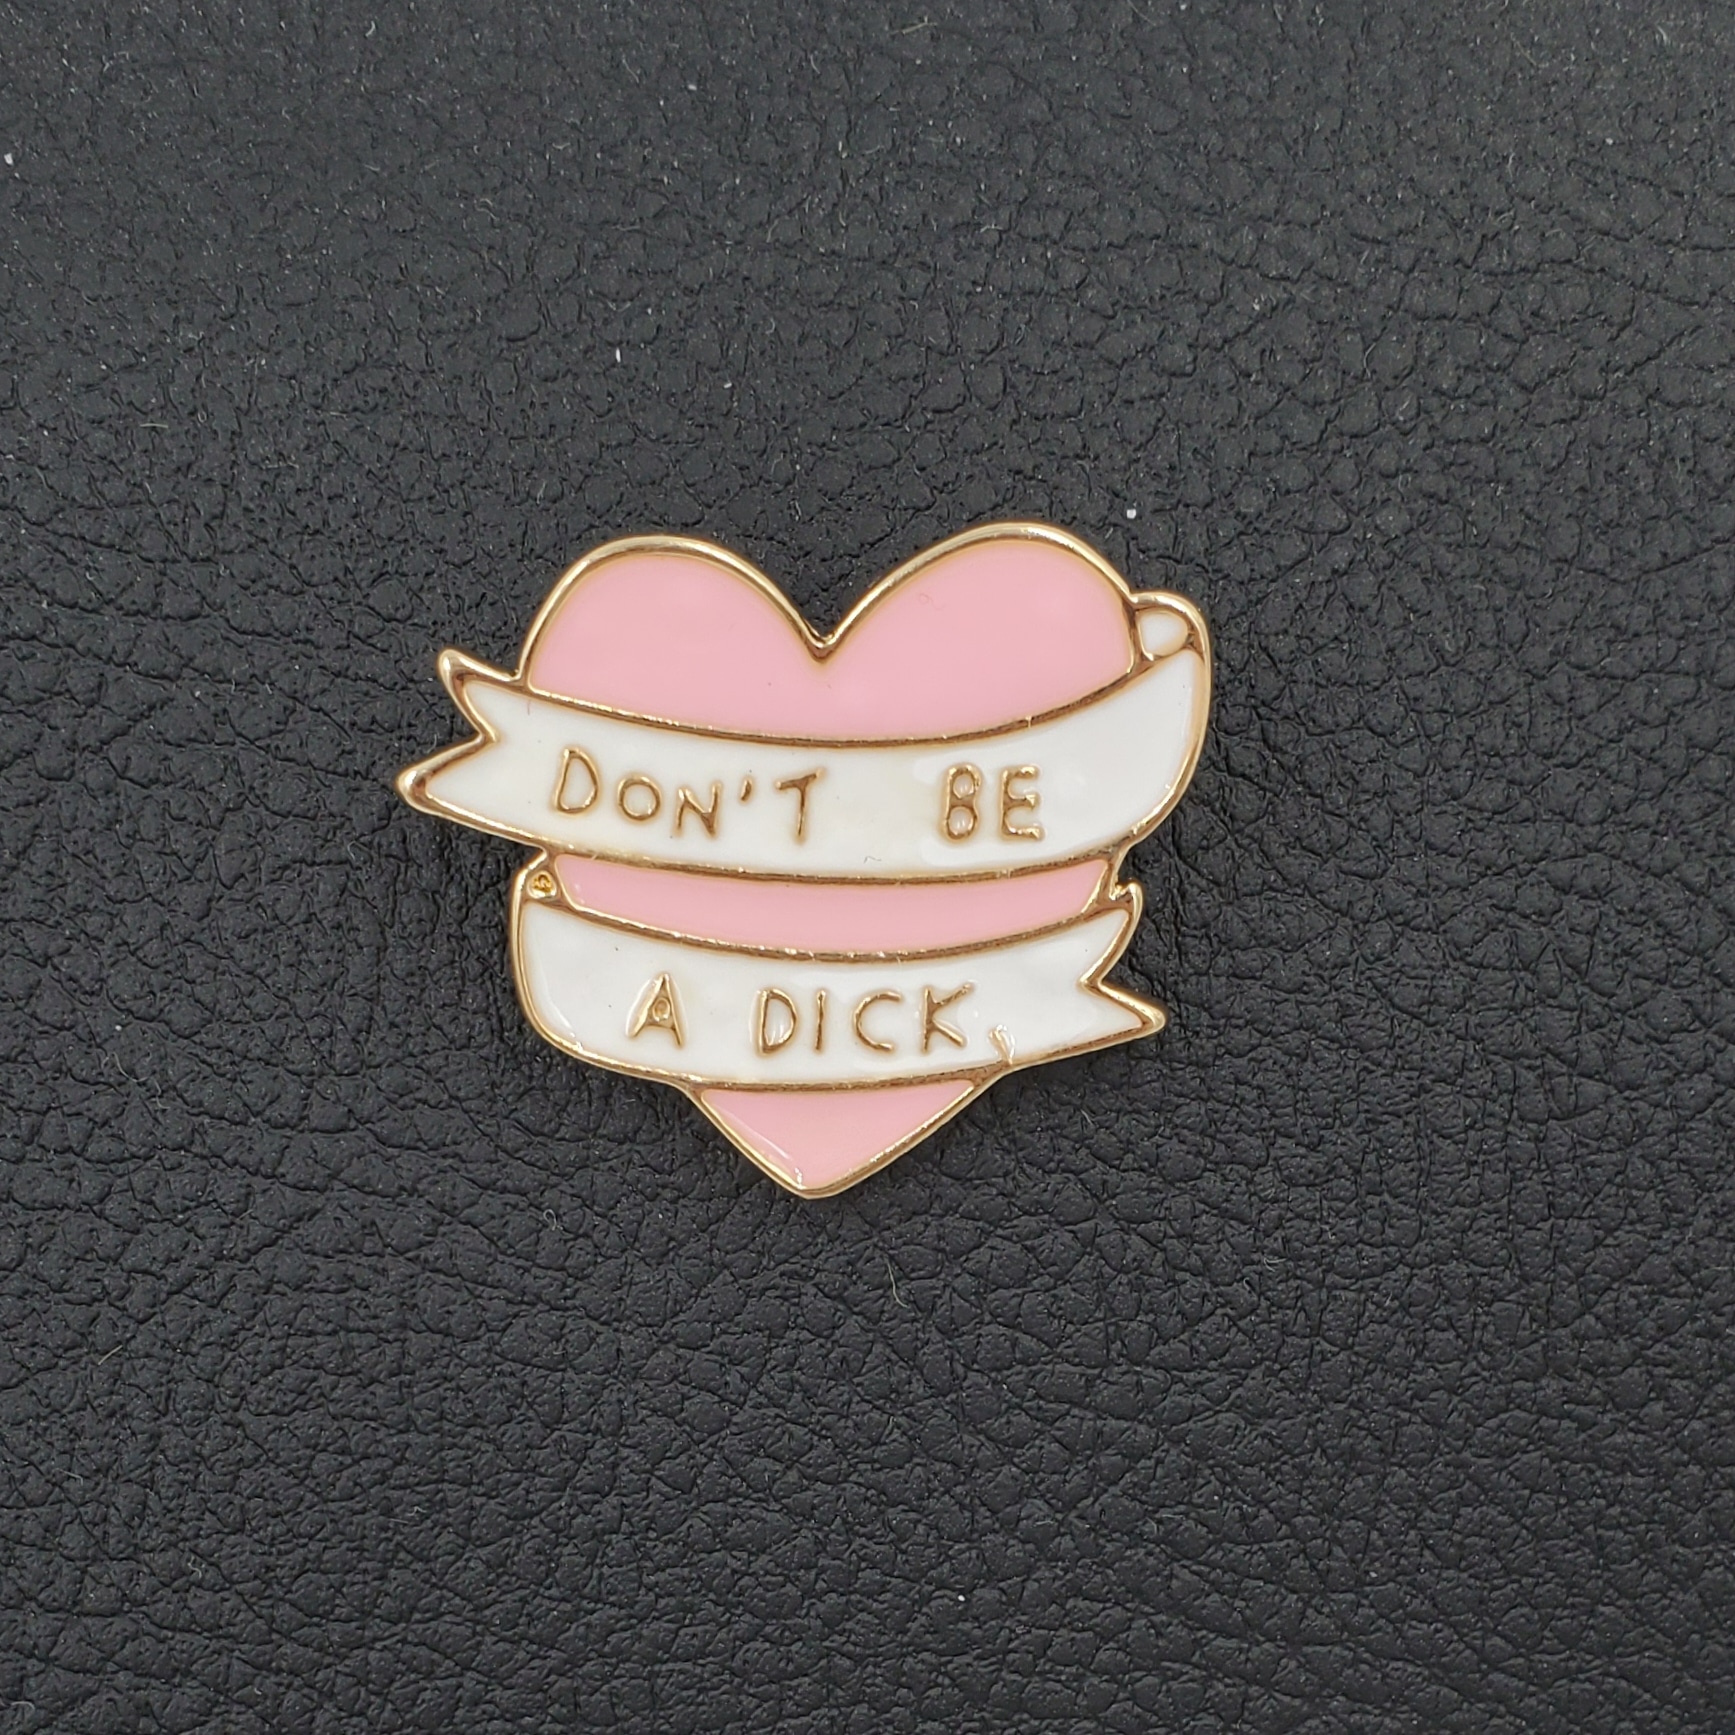 Dont Be A Dick Enamel Pin Chicago Dungeon Rentals